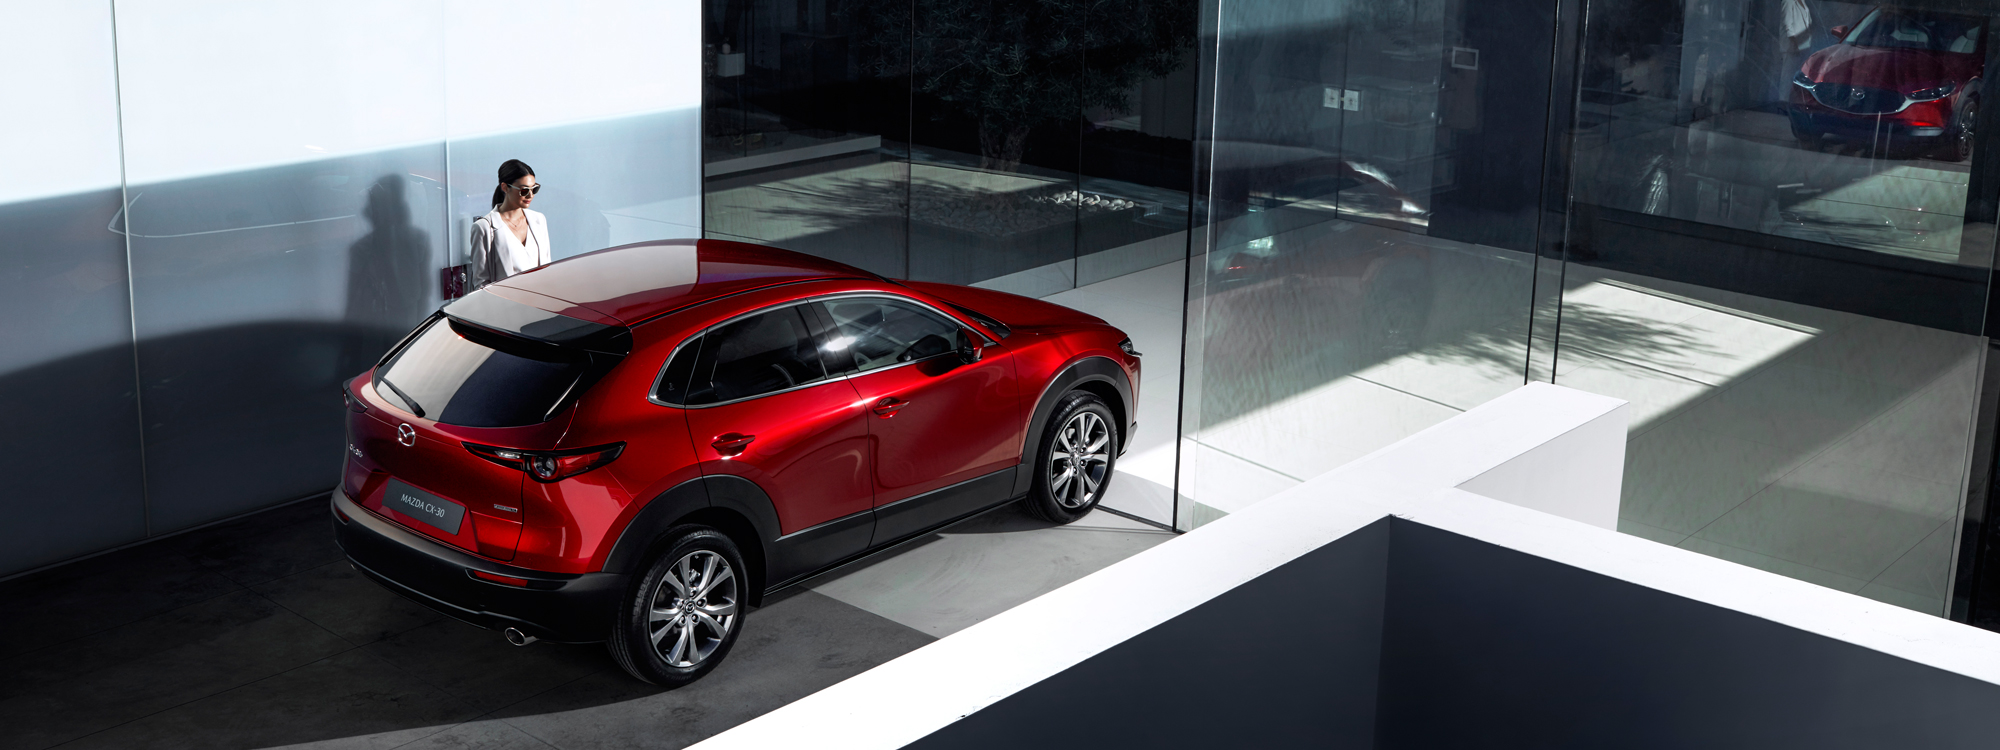 Mazda CX-30 with a woman